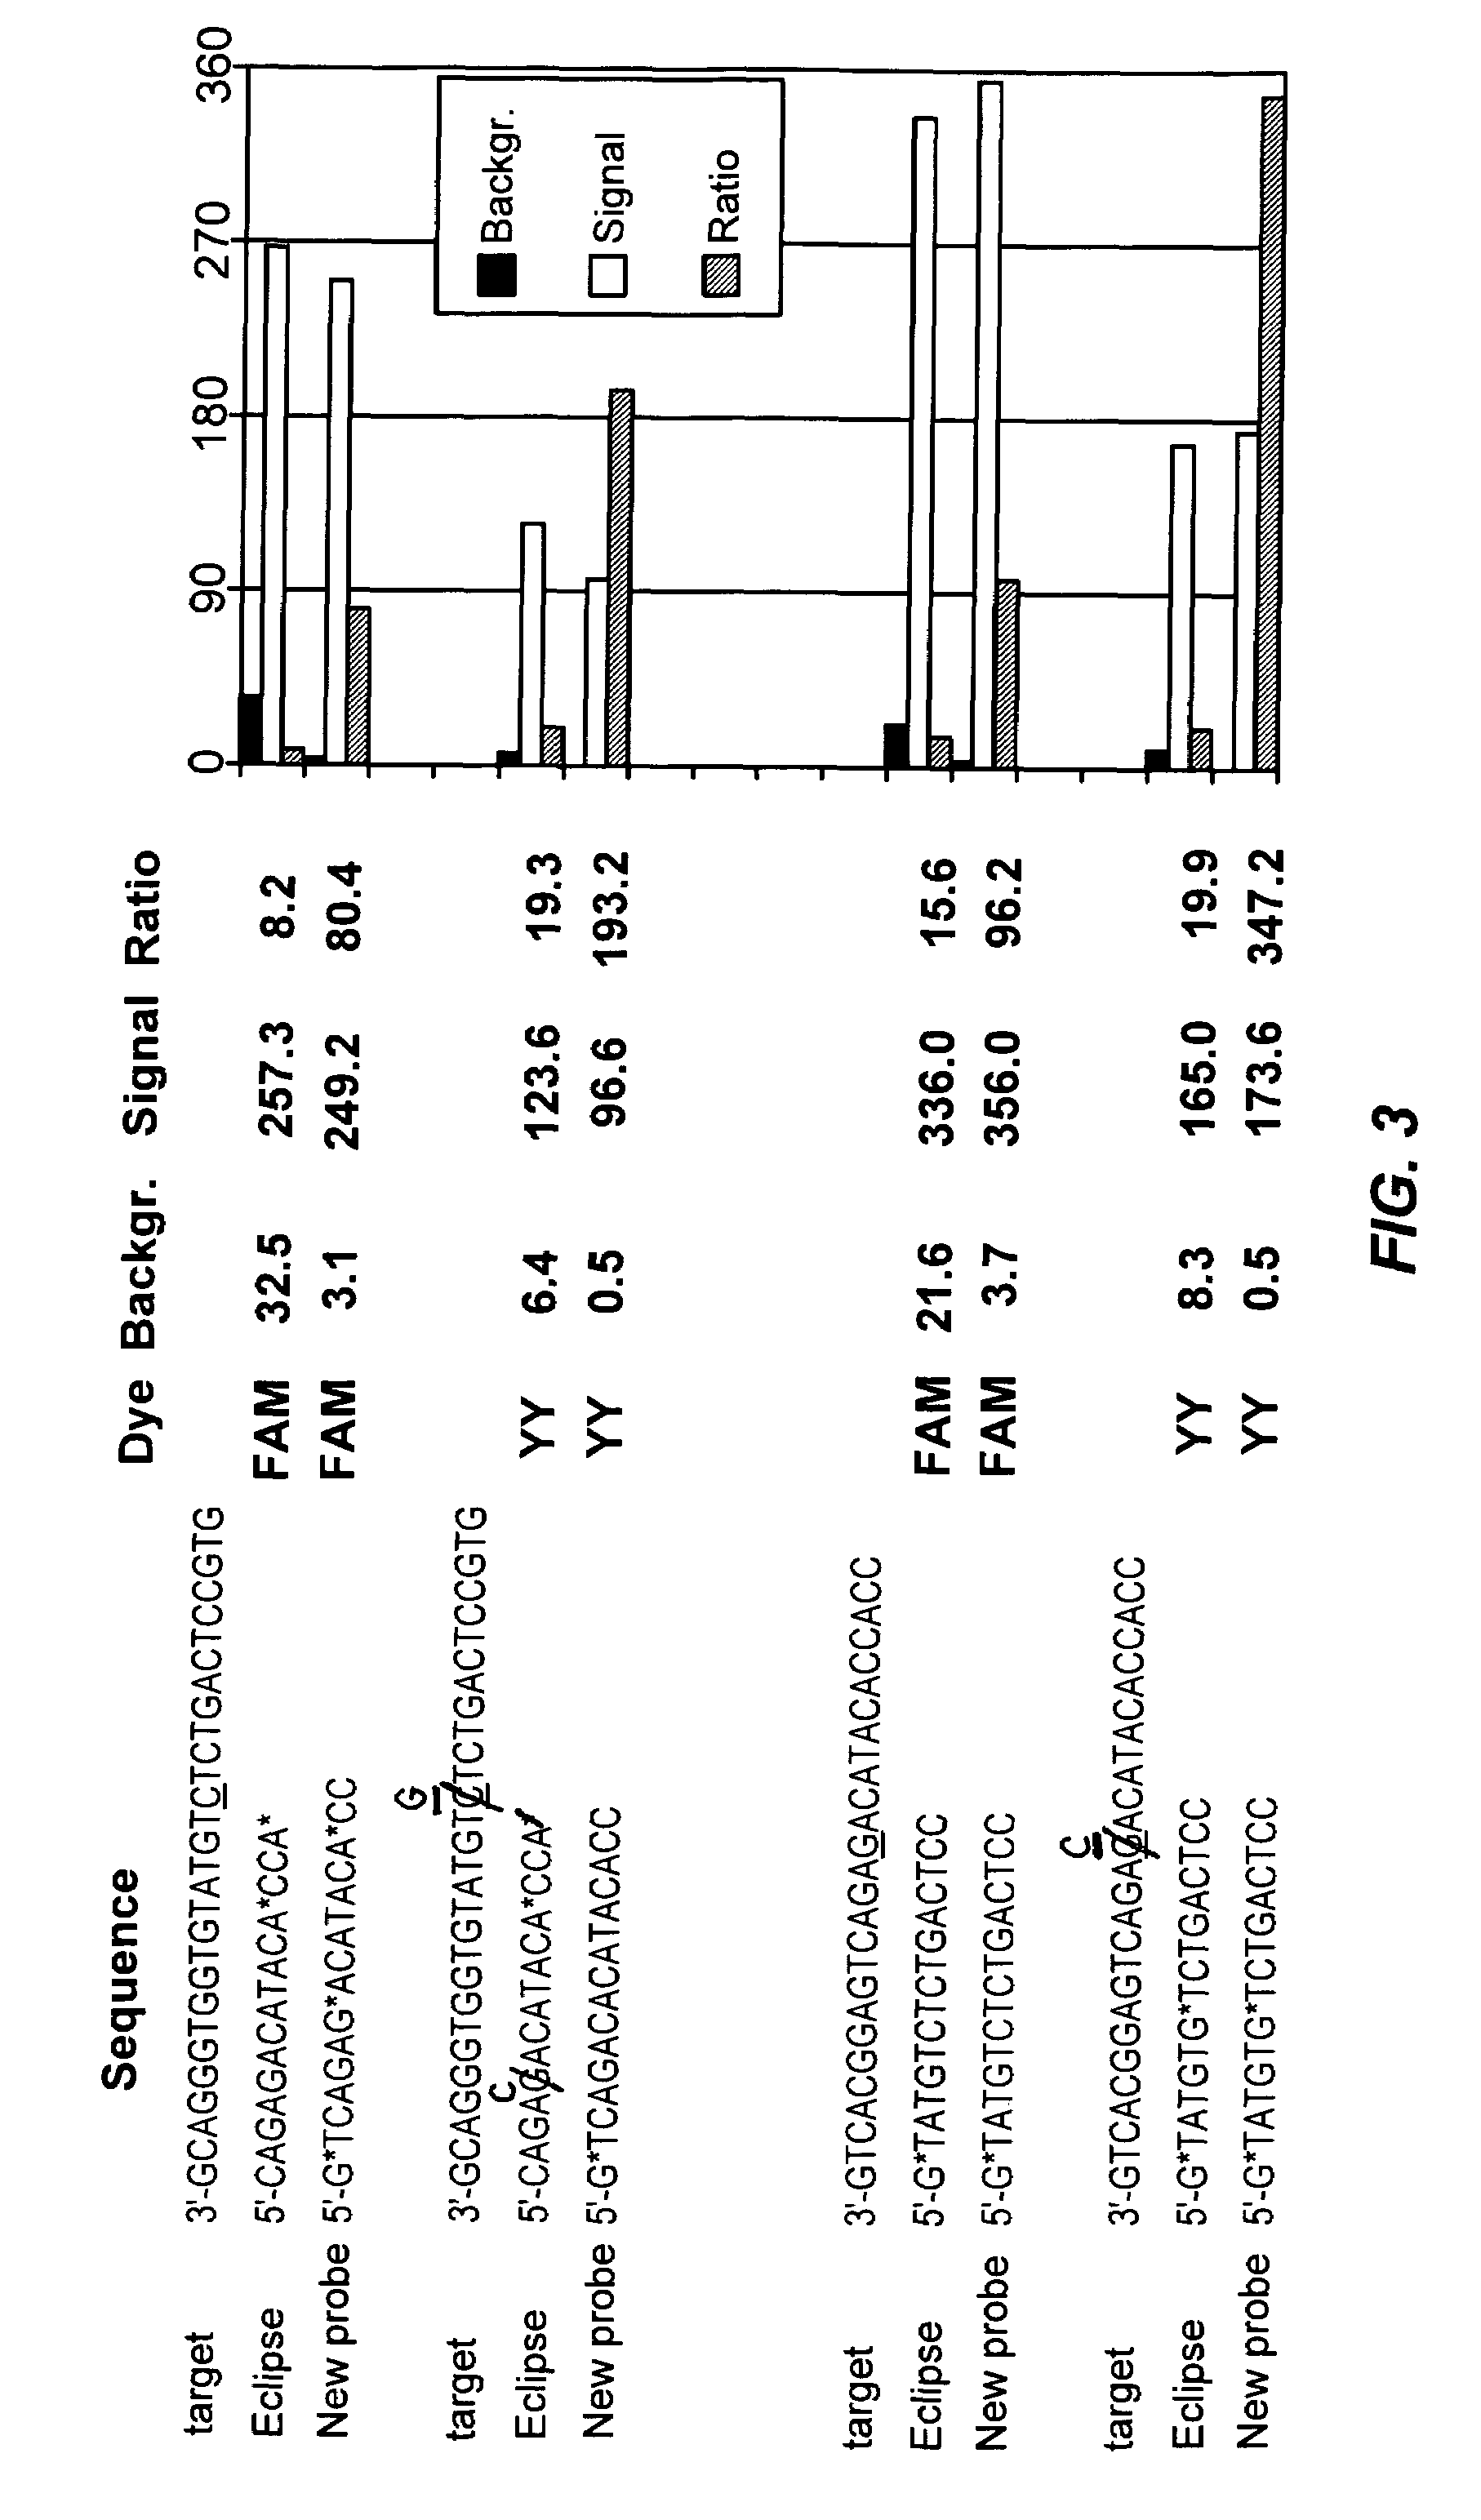 Fluorescent probes containing 5'-minor groove binder, fluorophore and quenching moieties and methods of use thereof